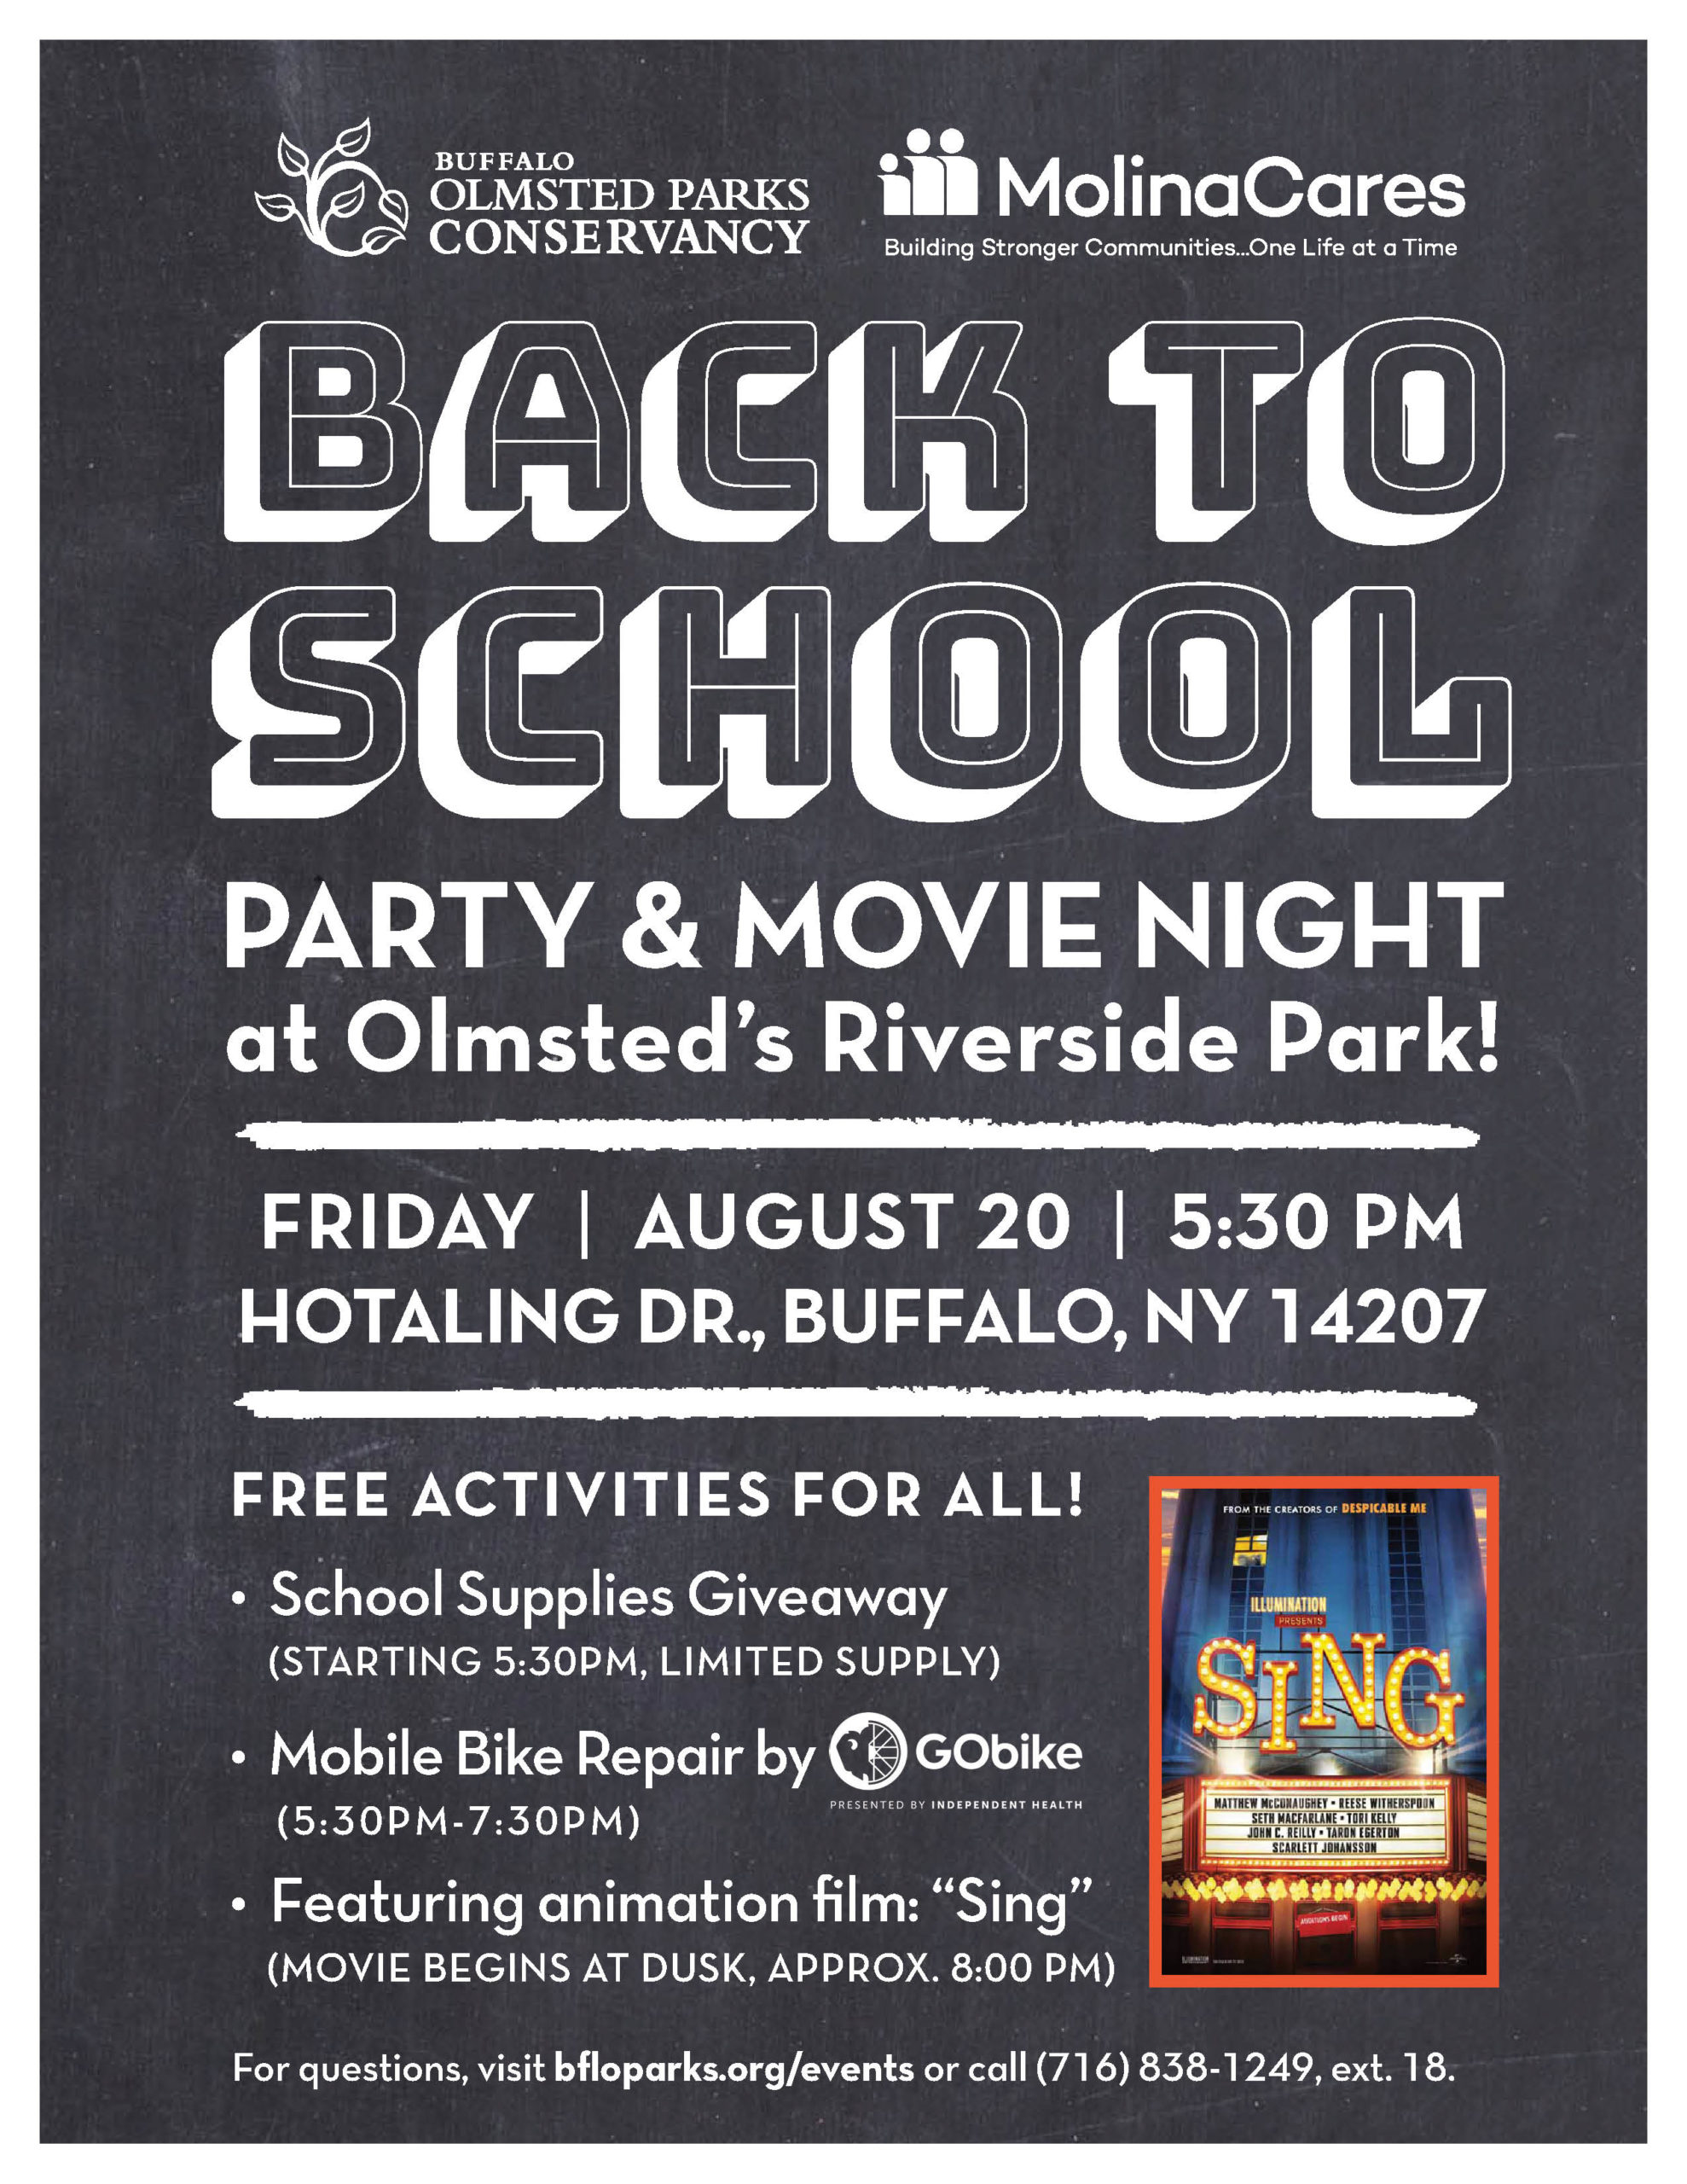 Back to School Party Flyer_Aug 20 2021-FINAL